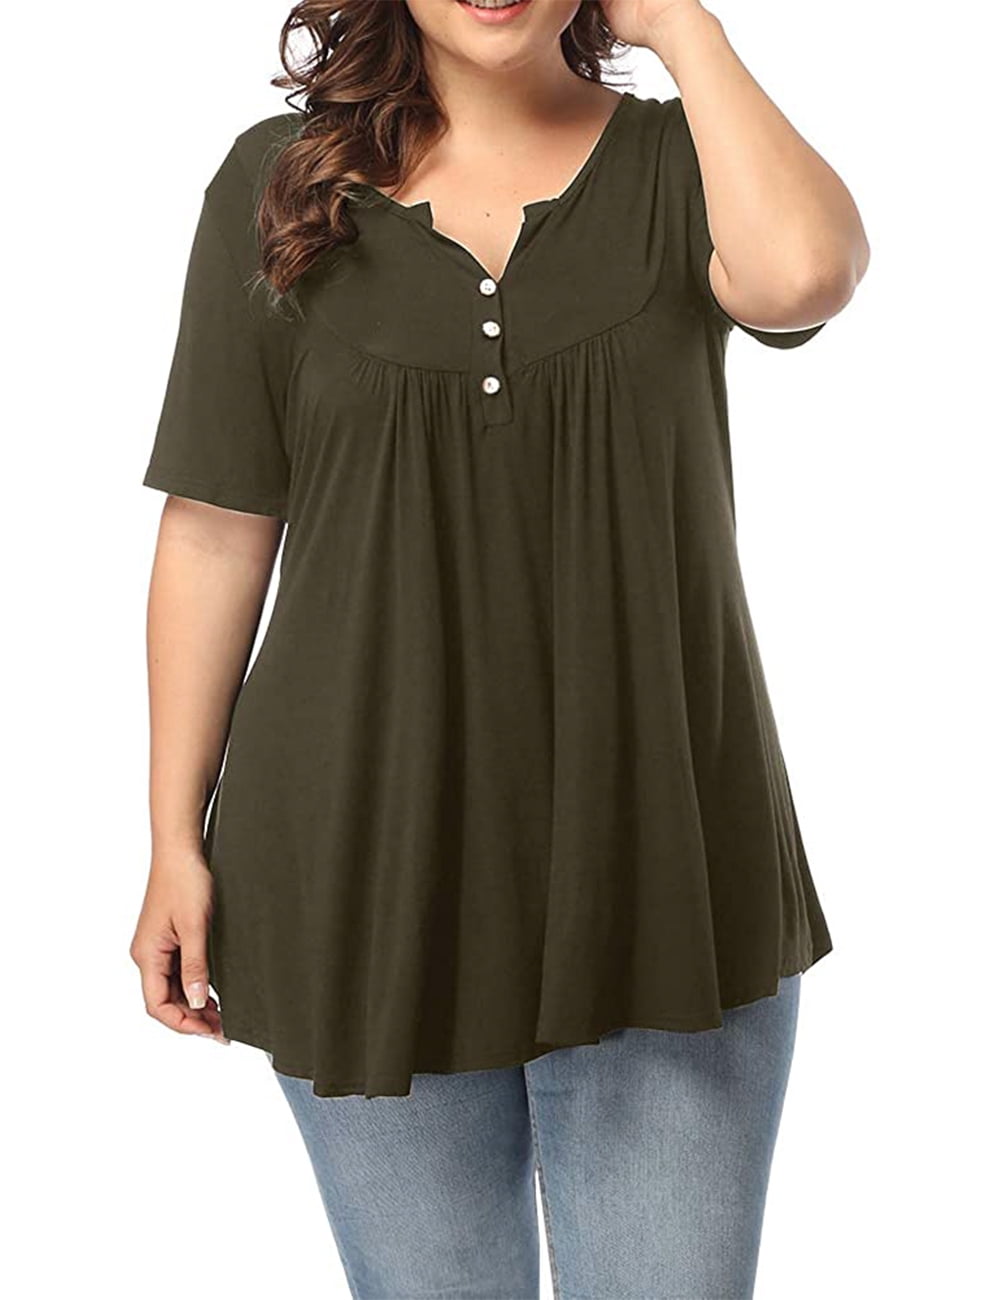 ALLEGRACE Women's Plus Size Henley V Neck Button Up Tunic Tops Casual Short Sleeve Ruffle Blouse Shirts